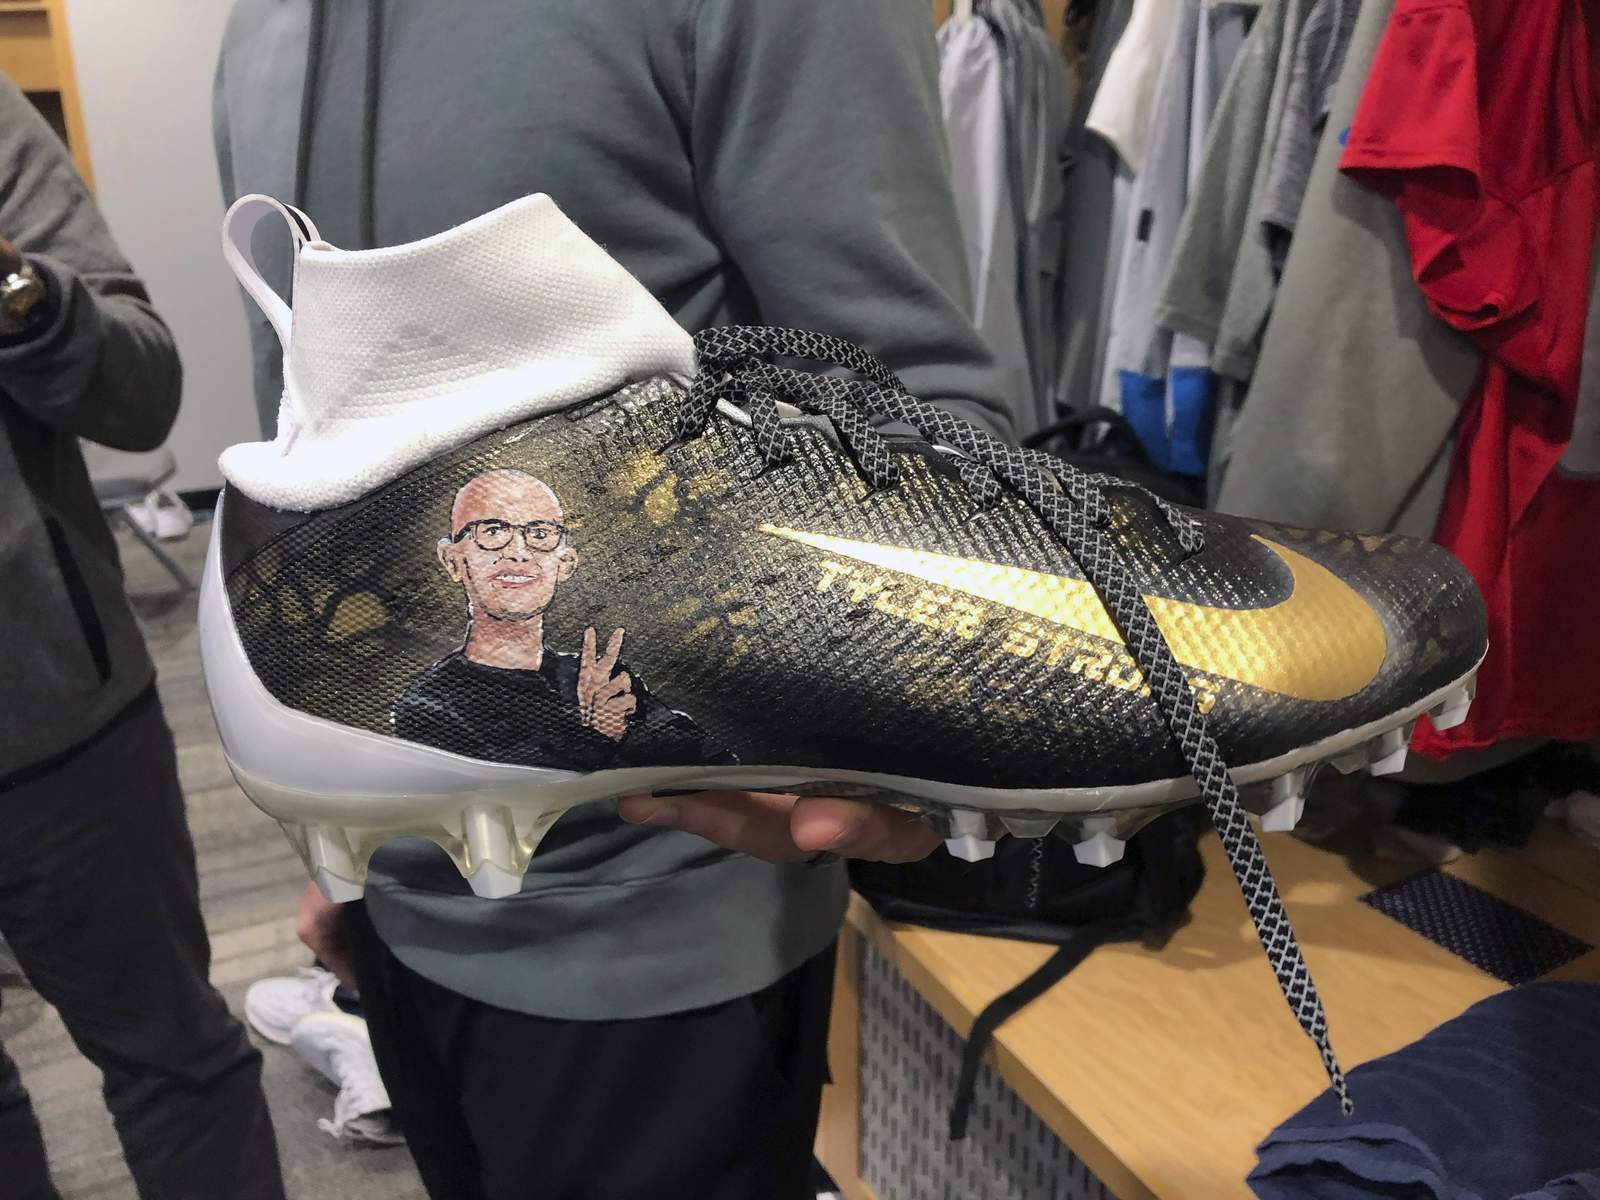 Lions QB Blough to honor Tyler Trent with special shoes